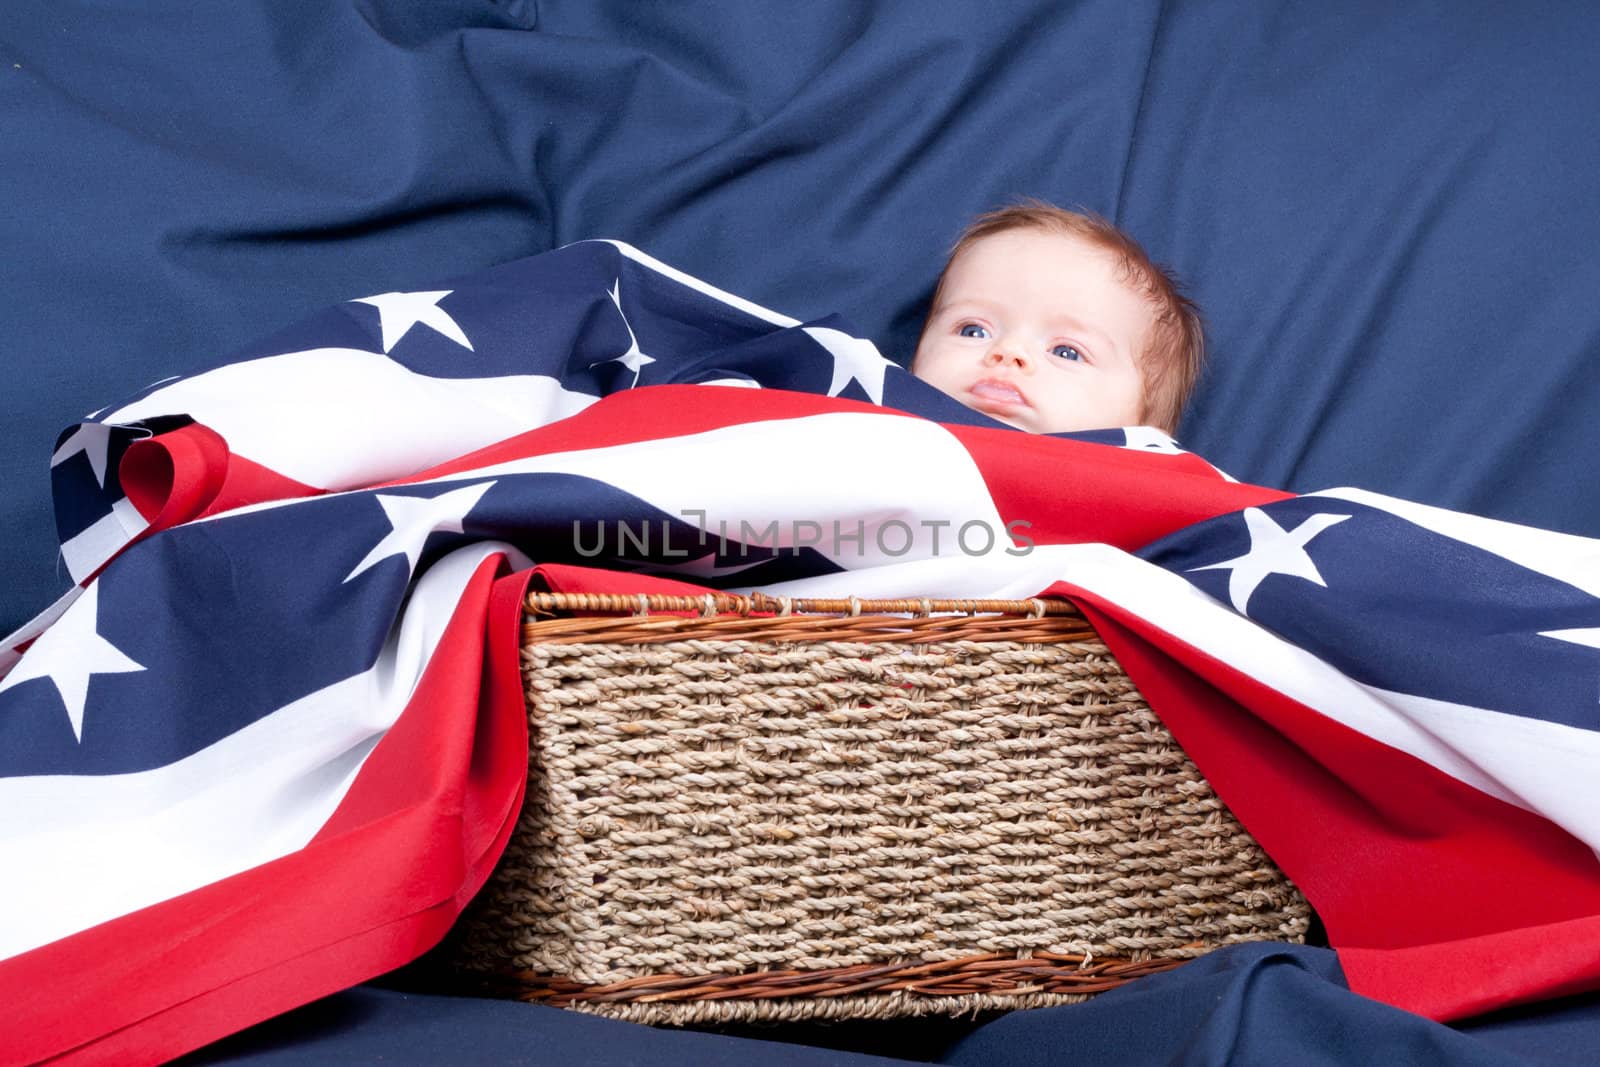 Baby In A Basket by strotter13